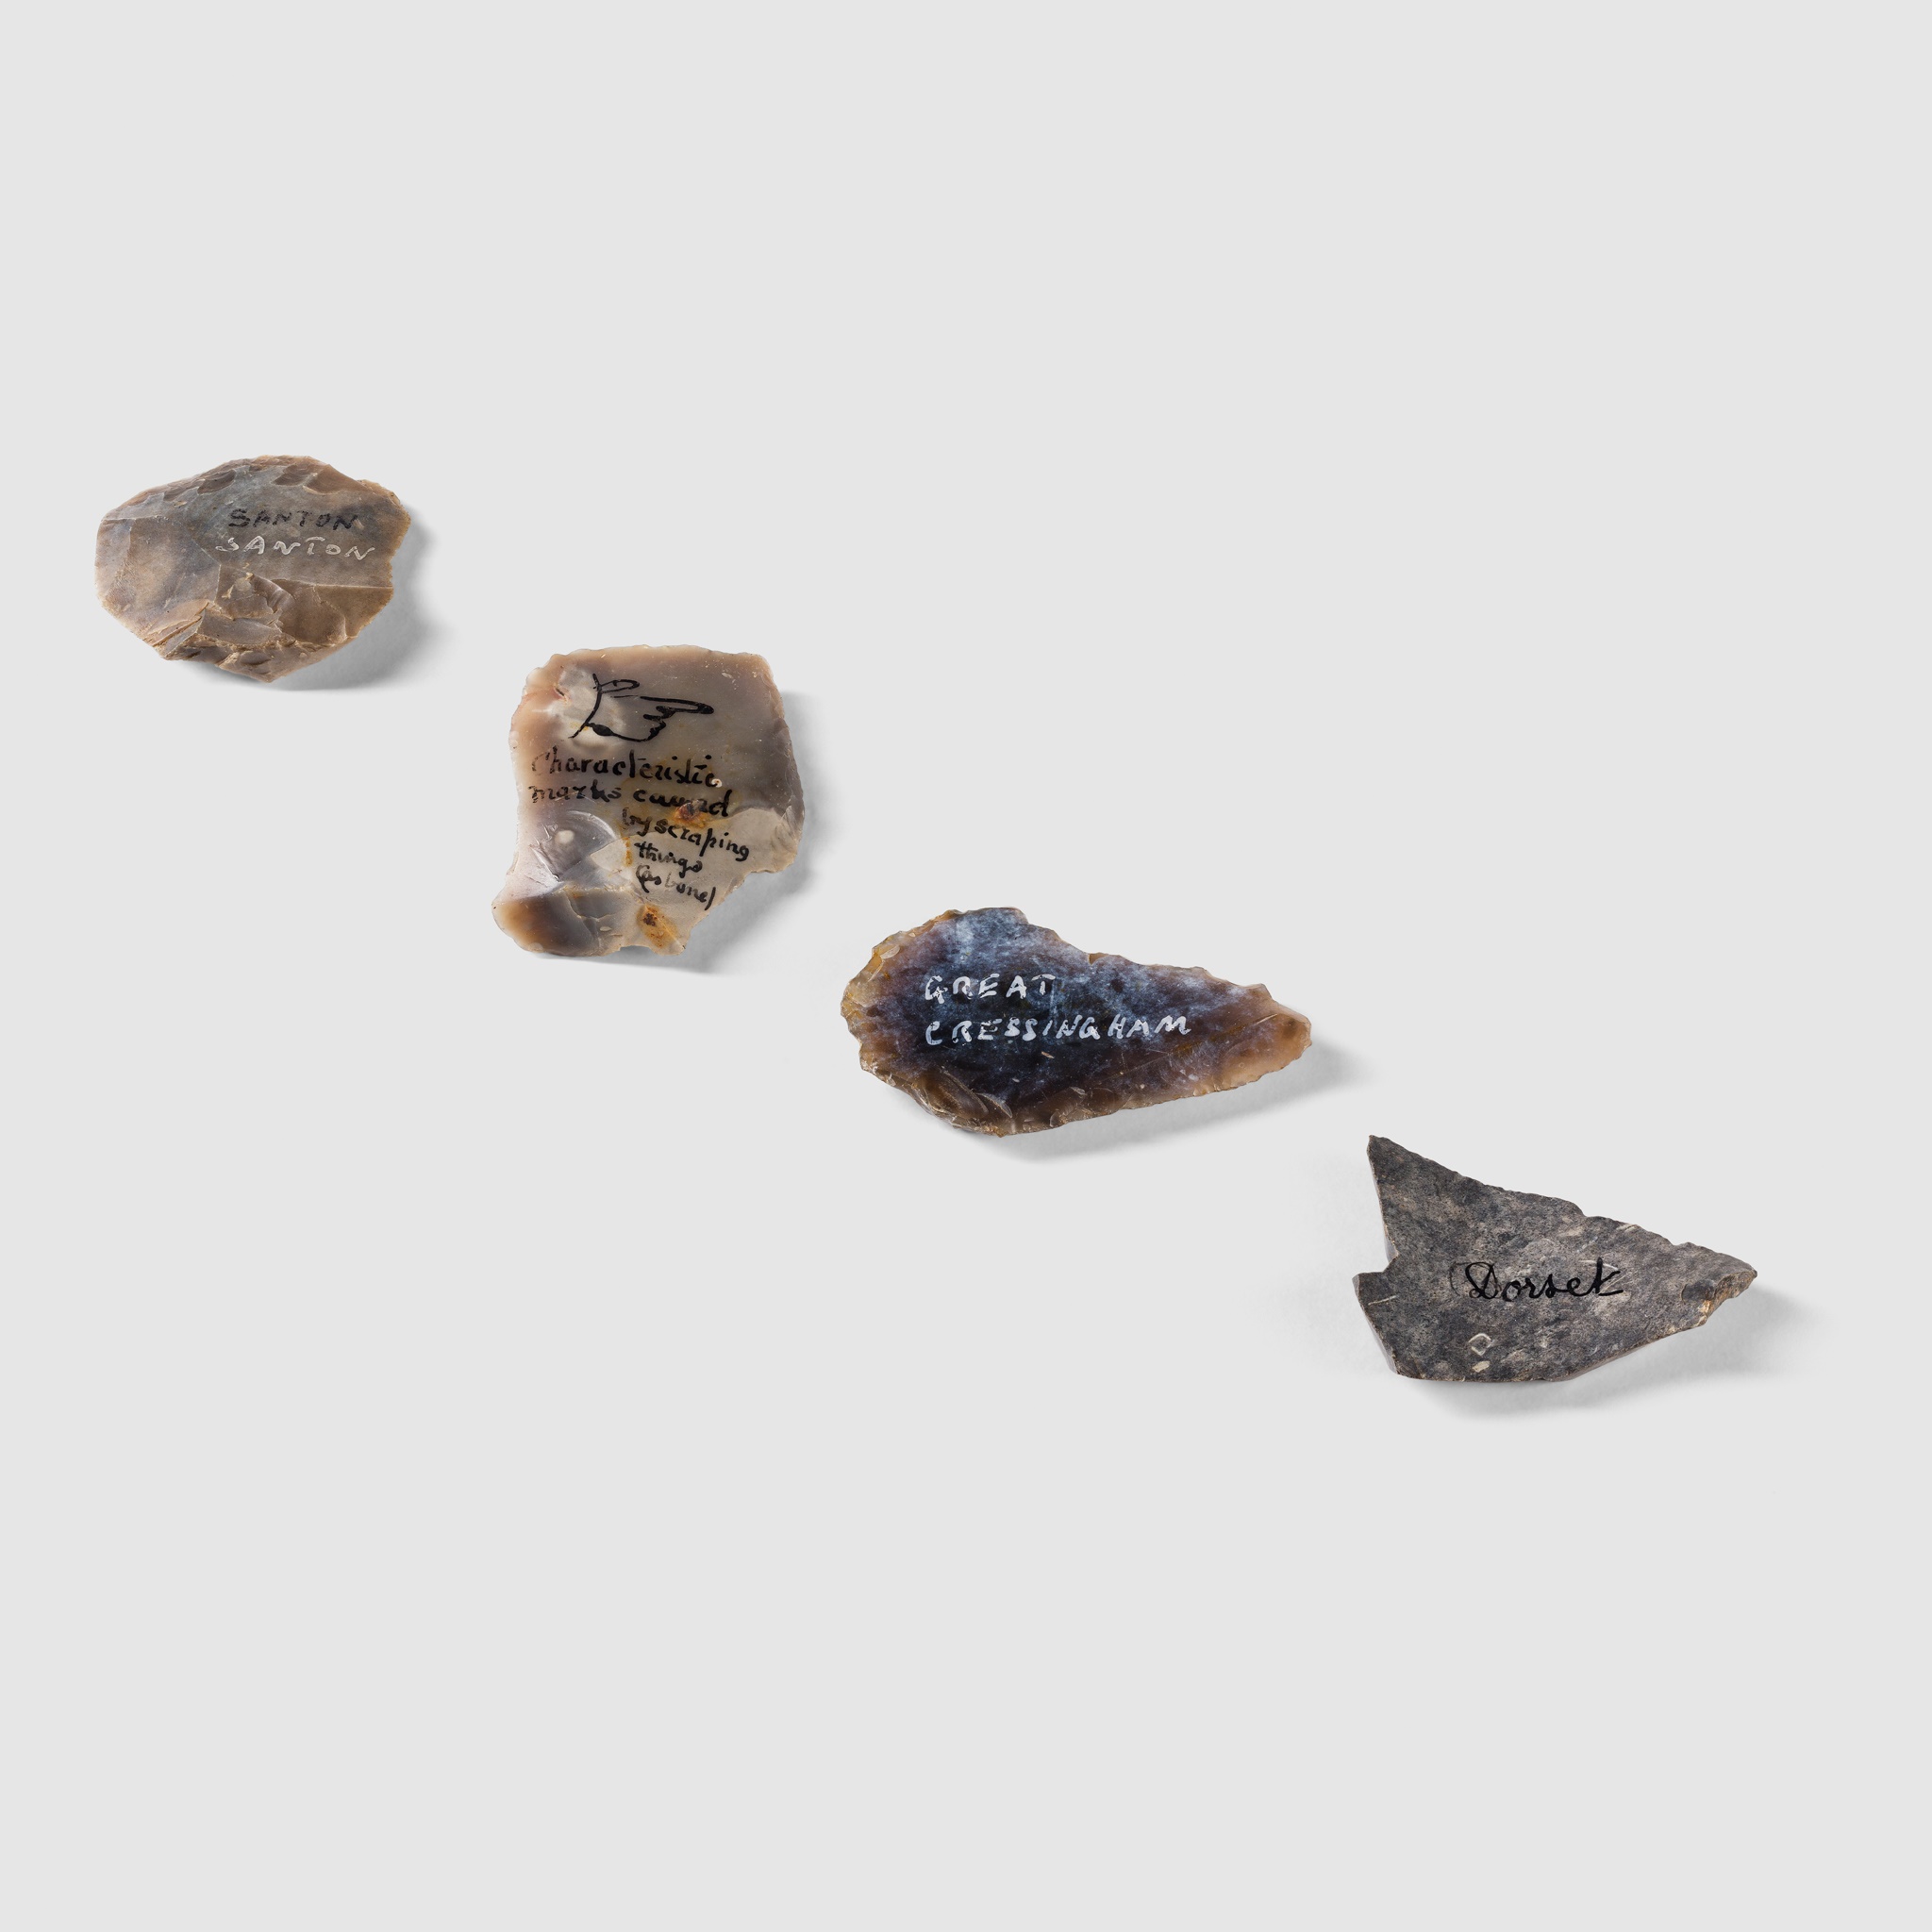 COLLECTION OF NEOLITHIC TOOLS WESTERN EUROPE, 3RD MILLENIUM B.C. - Image 4 of 4